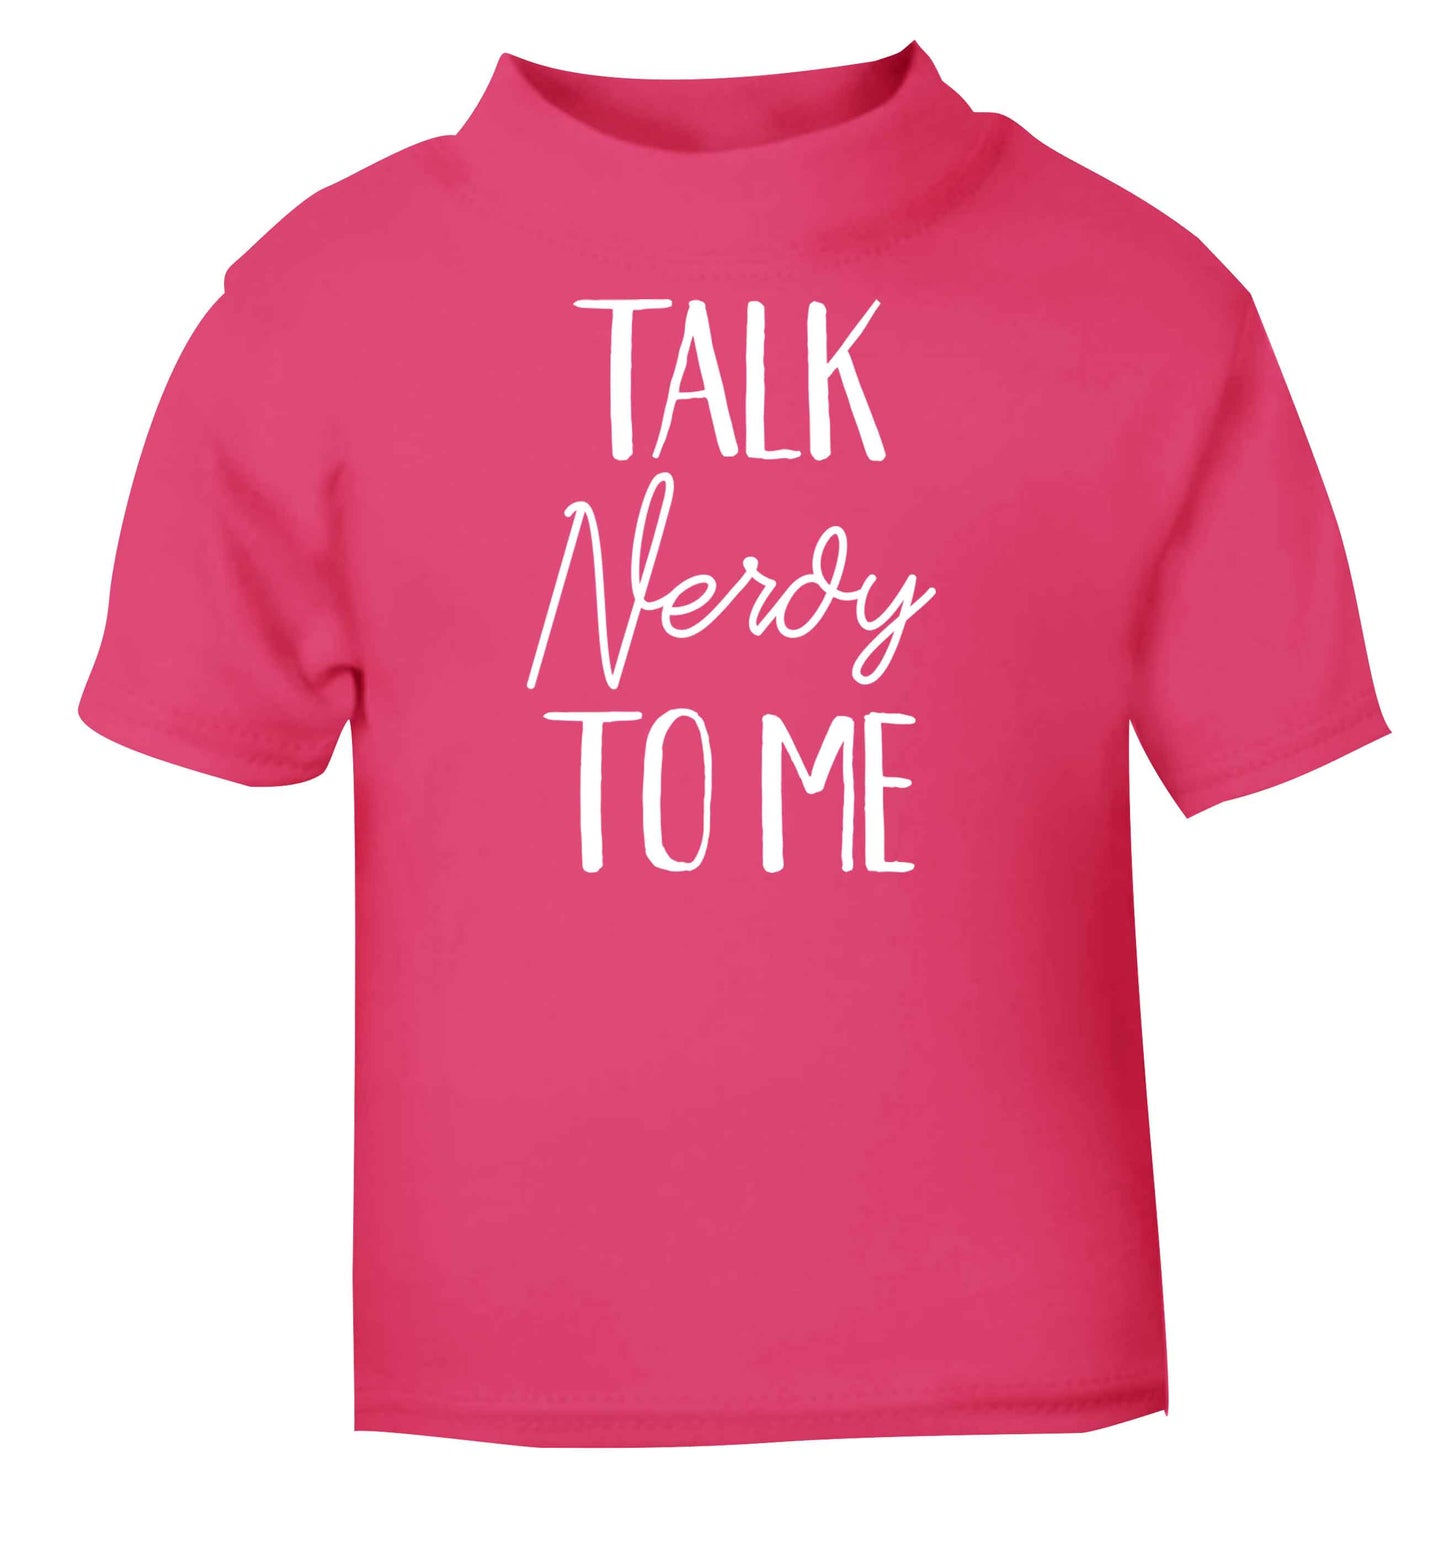 Talk nerdy to me pink baby toddler Tshirt 2 Years